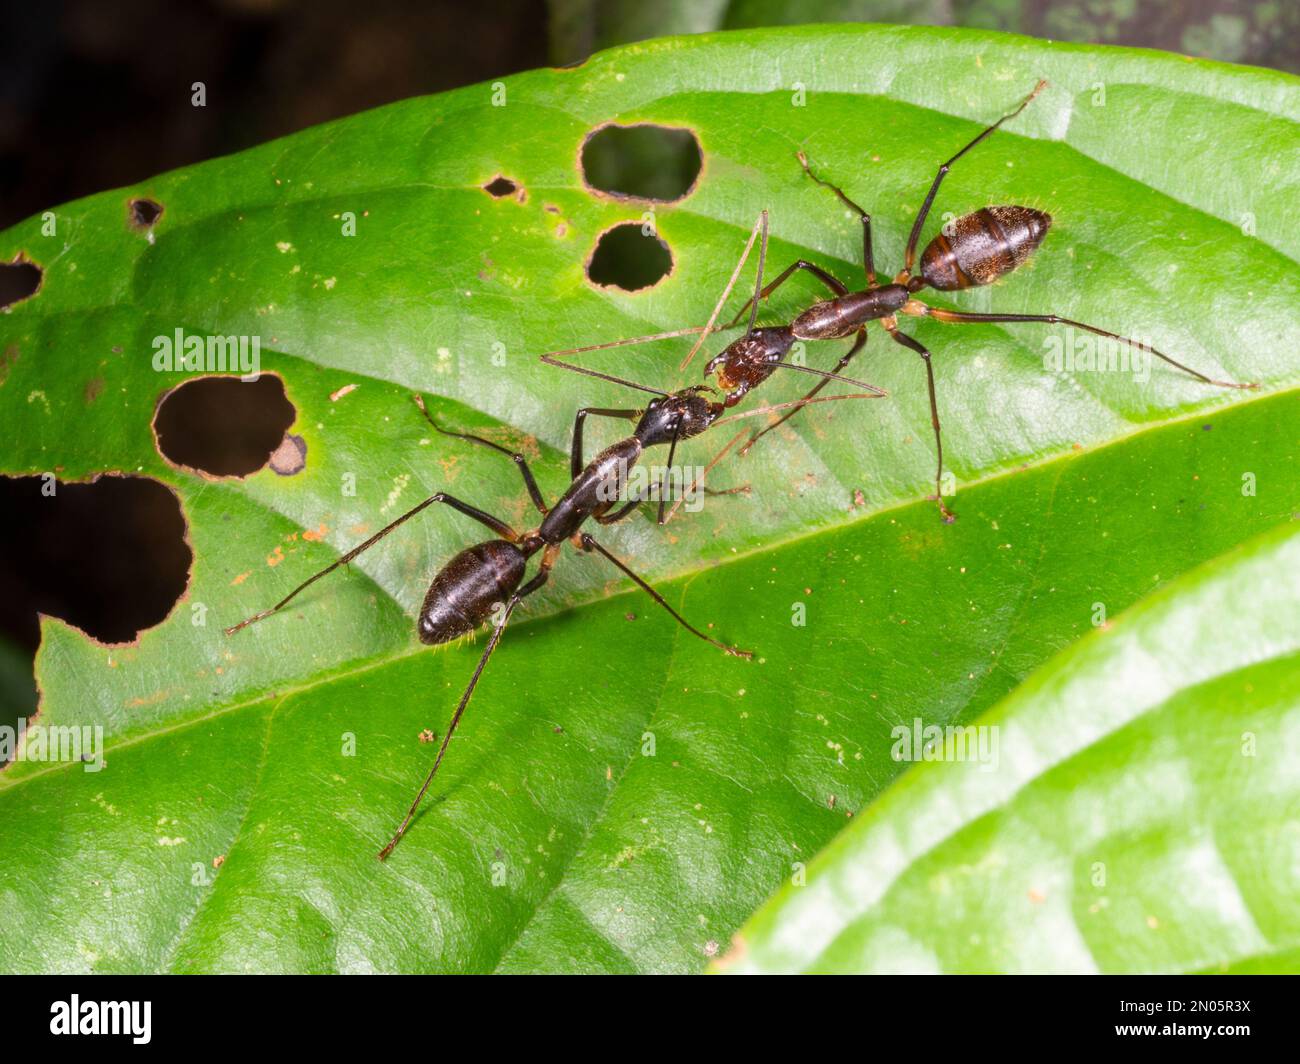 Two slender ants interacting on a leaf in the rainforest, Orellana province, Ecuador Stock Photo